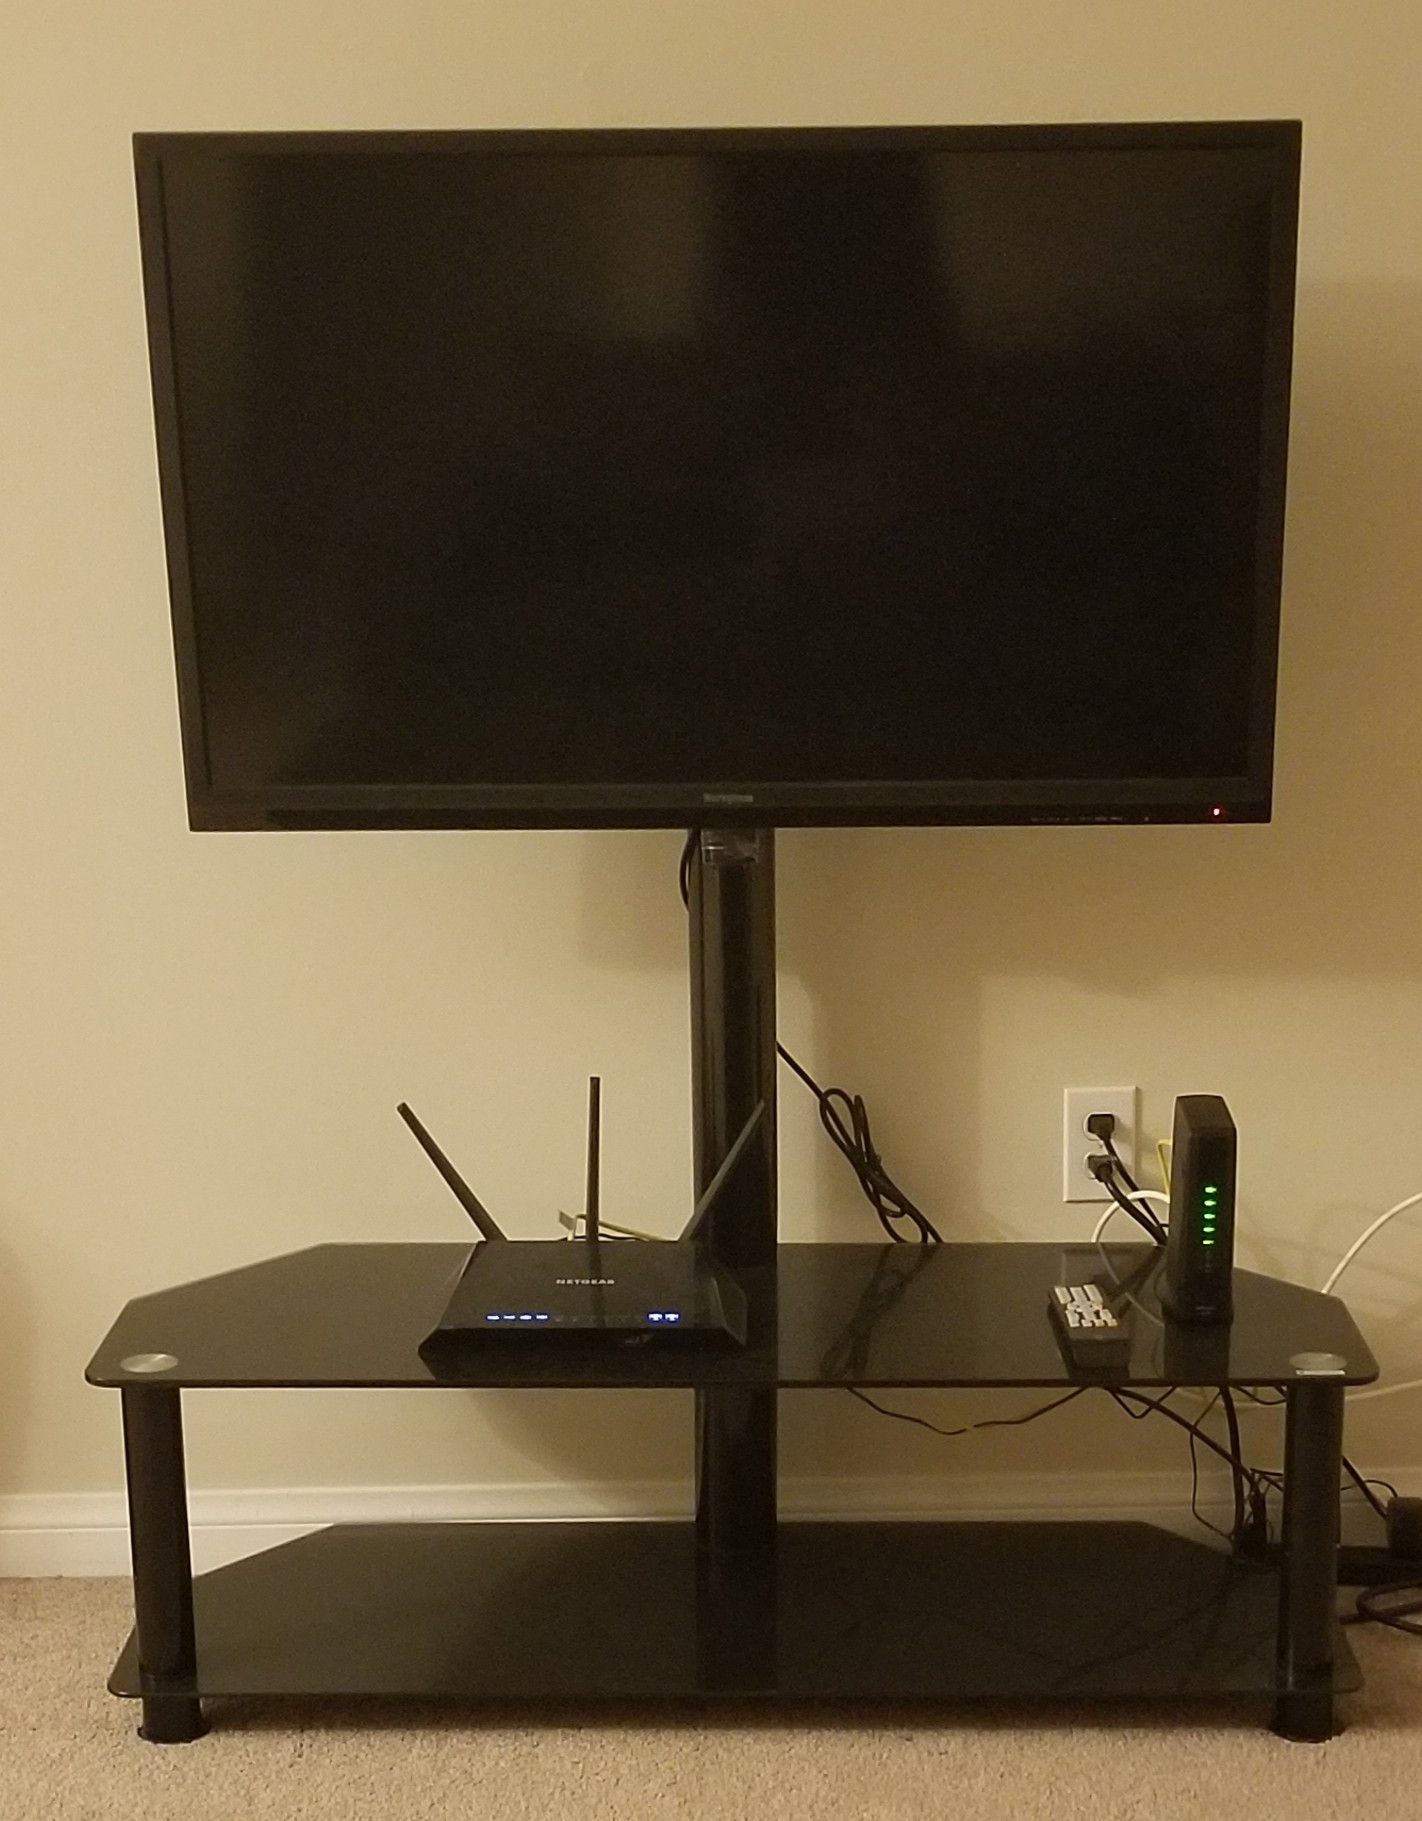 New 40 in LED 1080P TV + New Stand